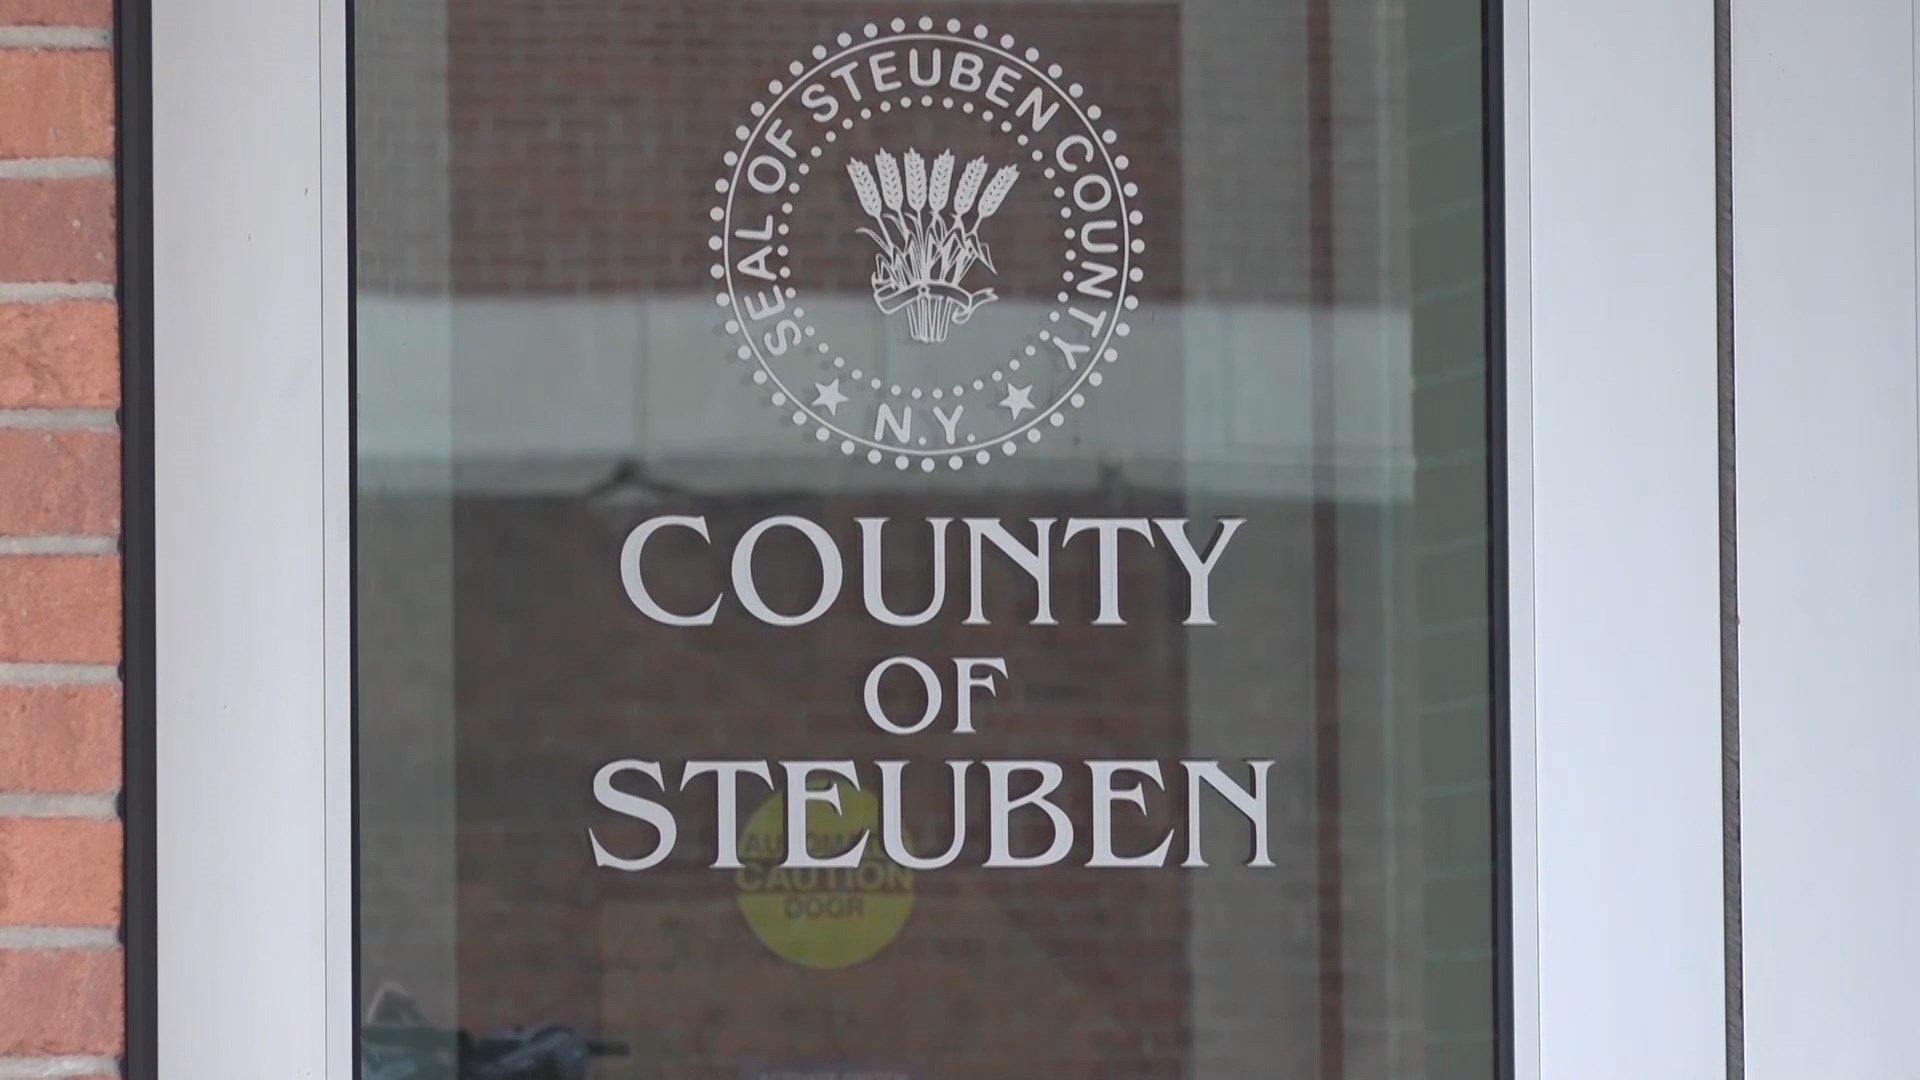 Steuben County Fair manager appointed to fill unexpired term of legislator who died in October